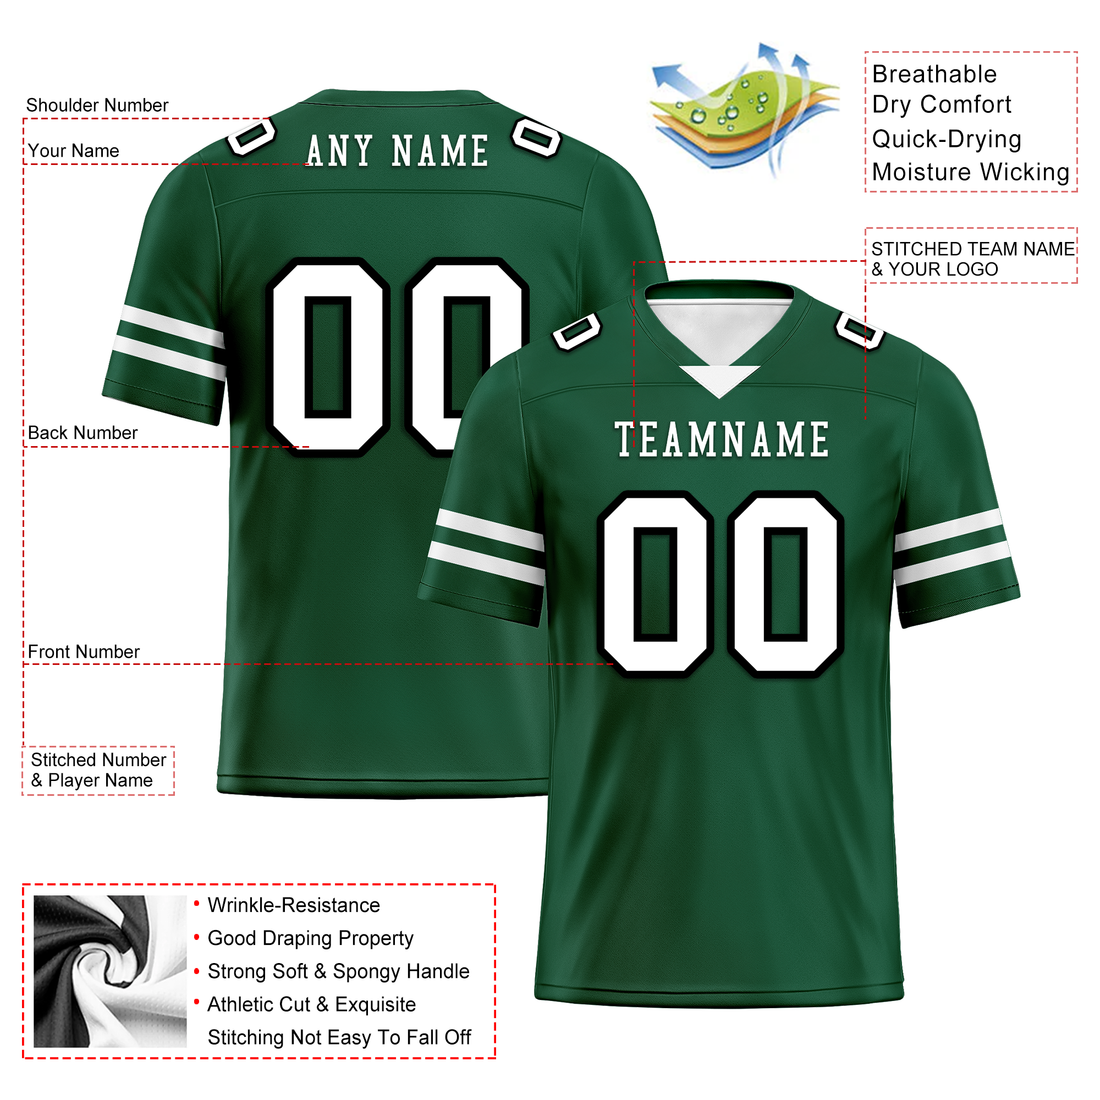 Custom Green Classic Style Personalized Authentic Football Jersey FBJ02-bd0a70a9